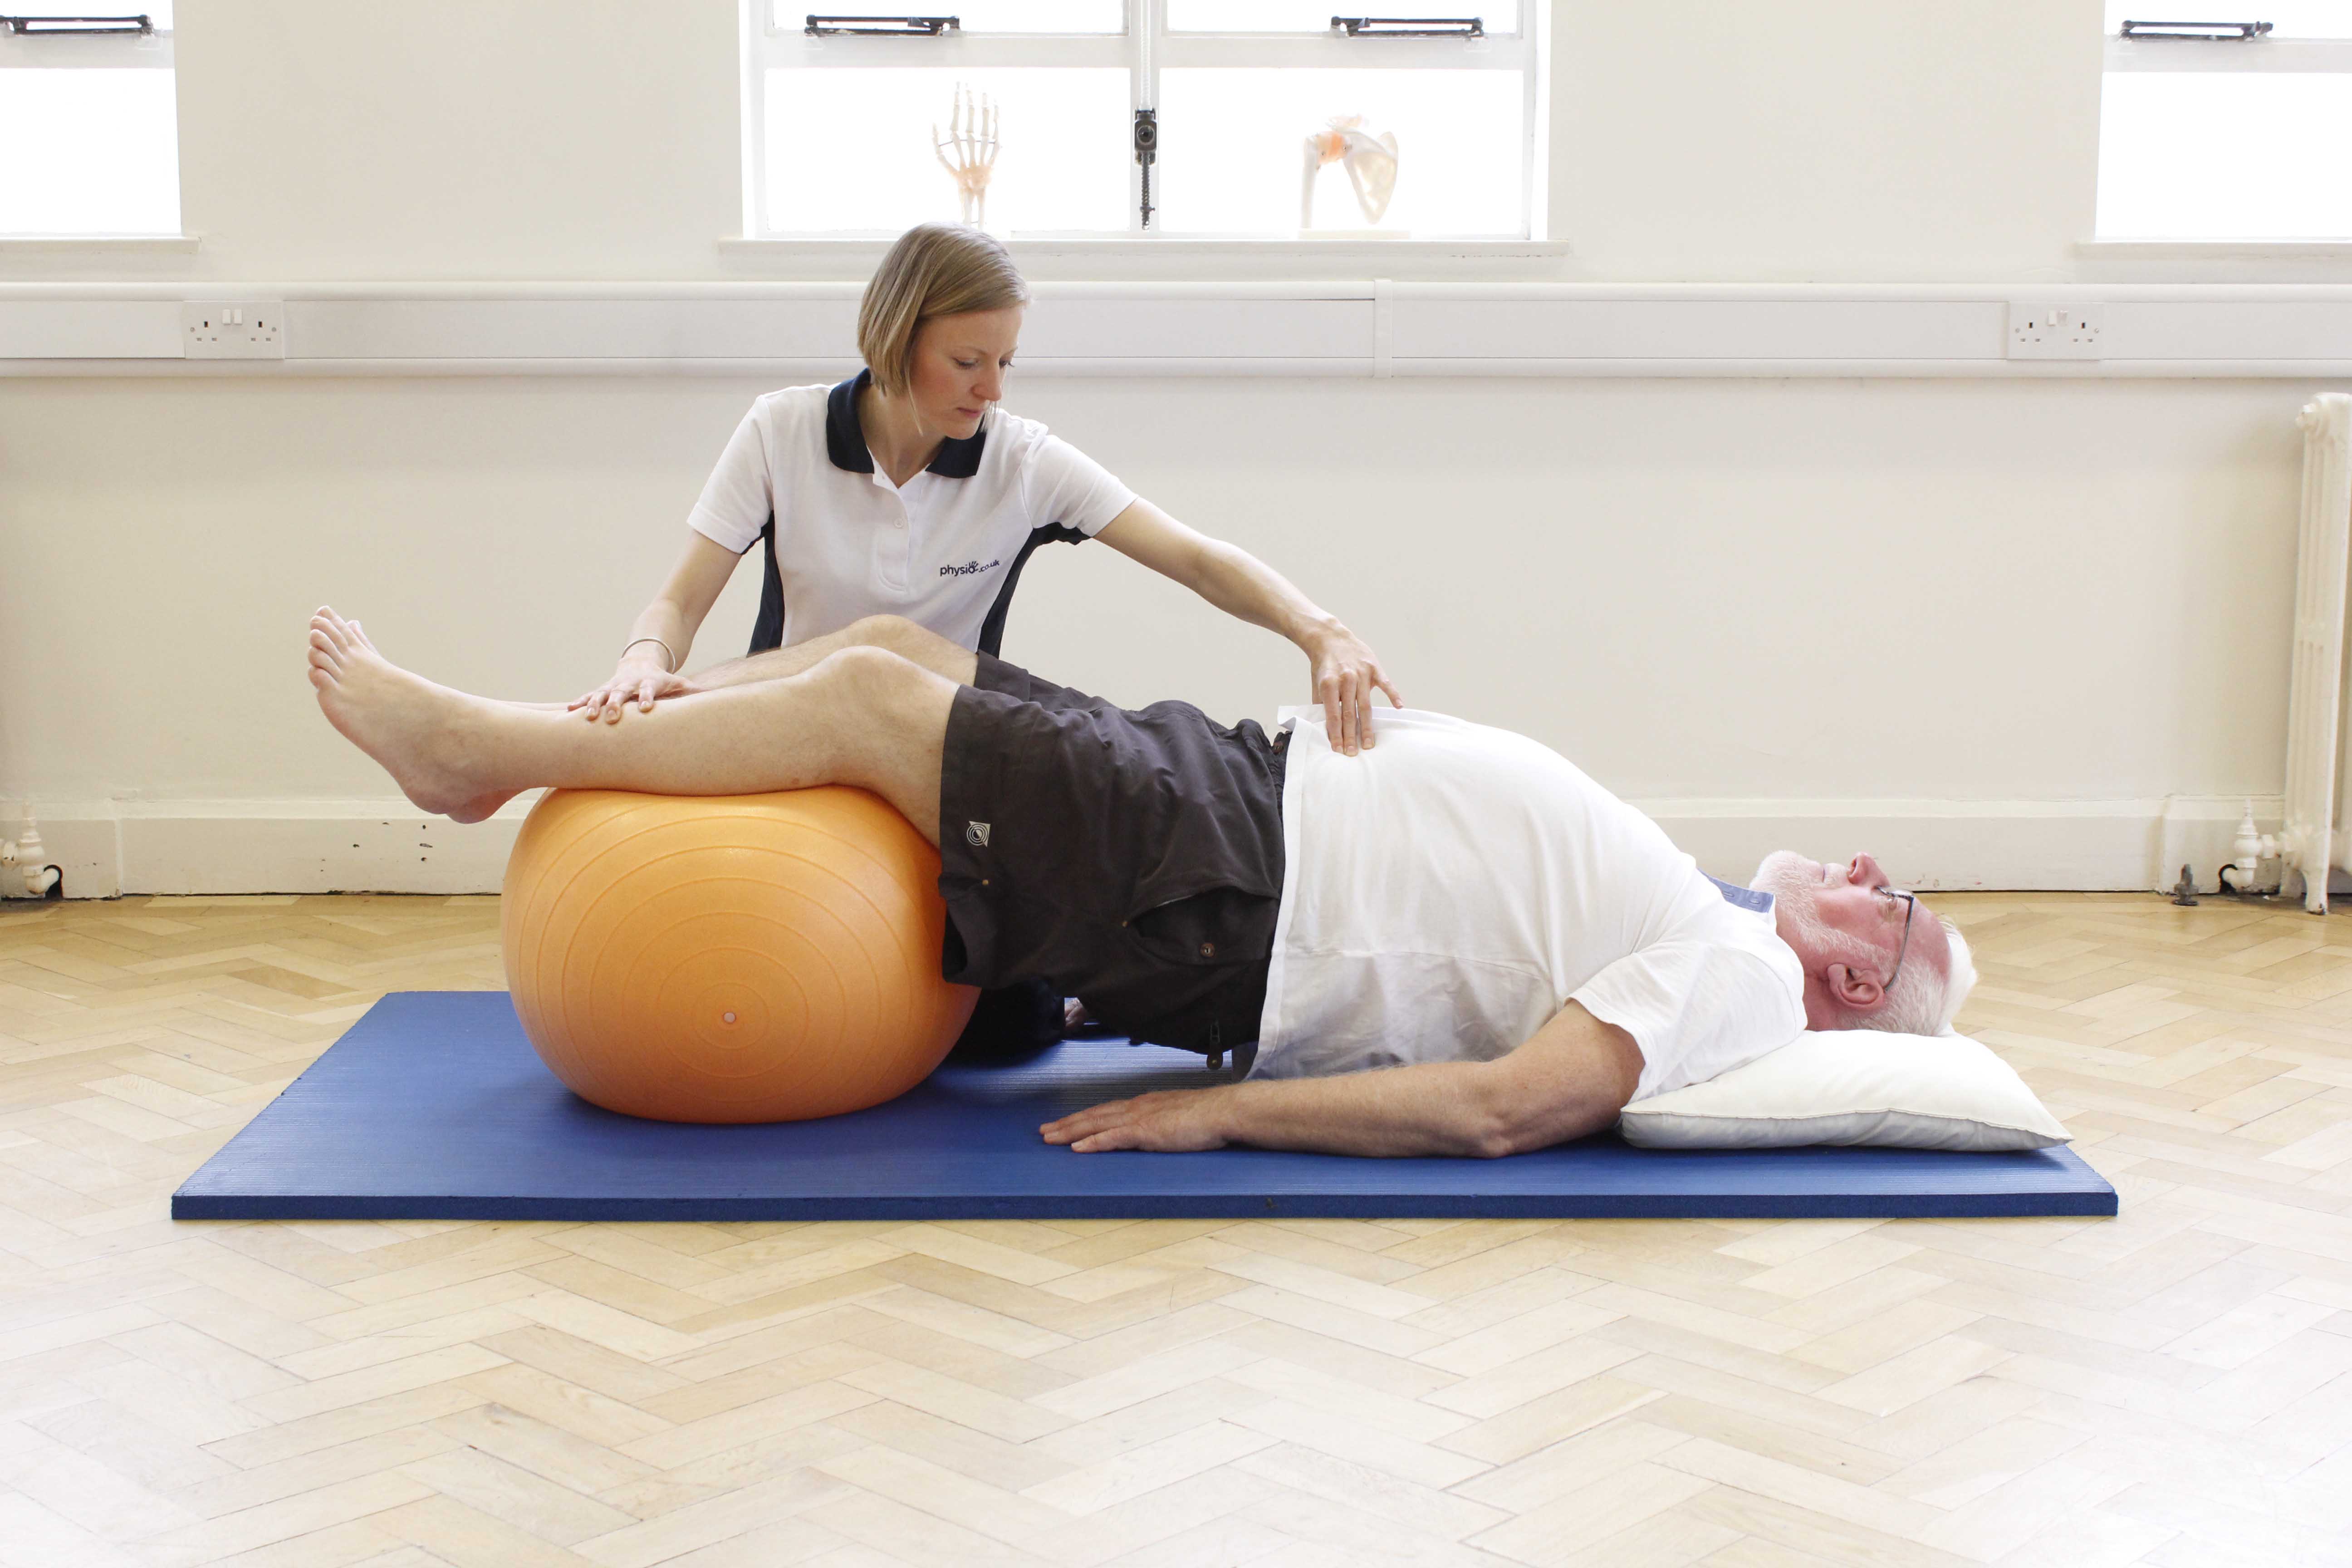 Pelvic floor and abdominal exercises supervised by a specialist physiotherapist